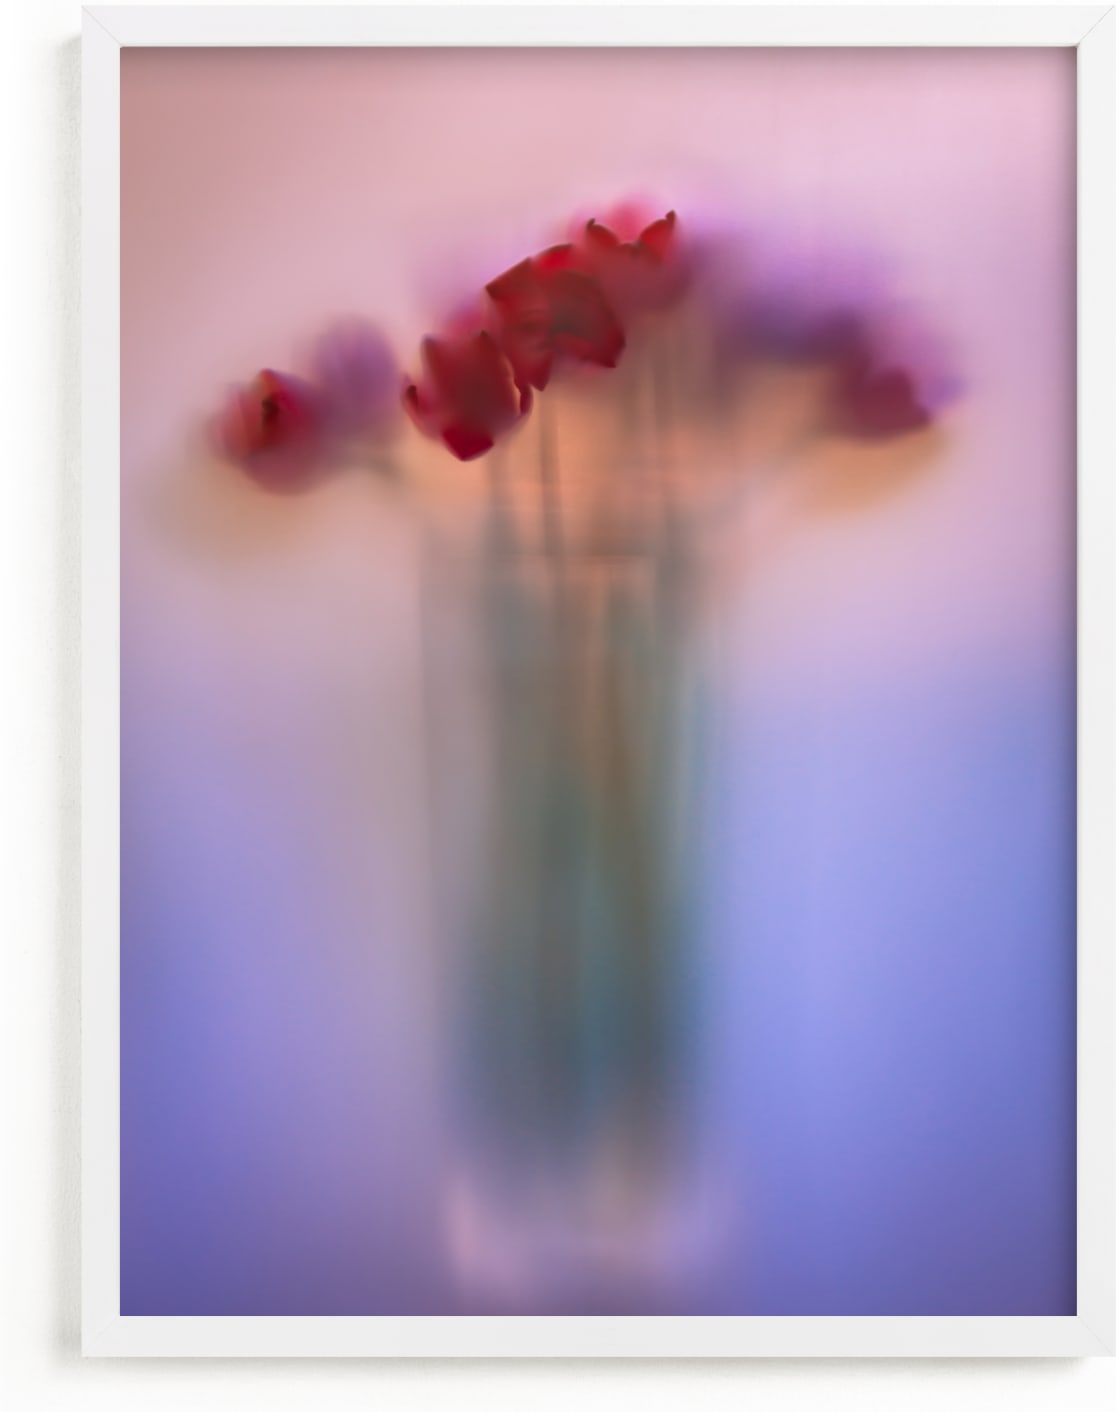 This is a purple, pink, red art by Aralyn Griesbach called Tulips in vase.